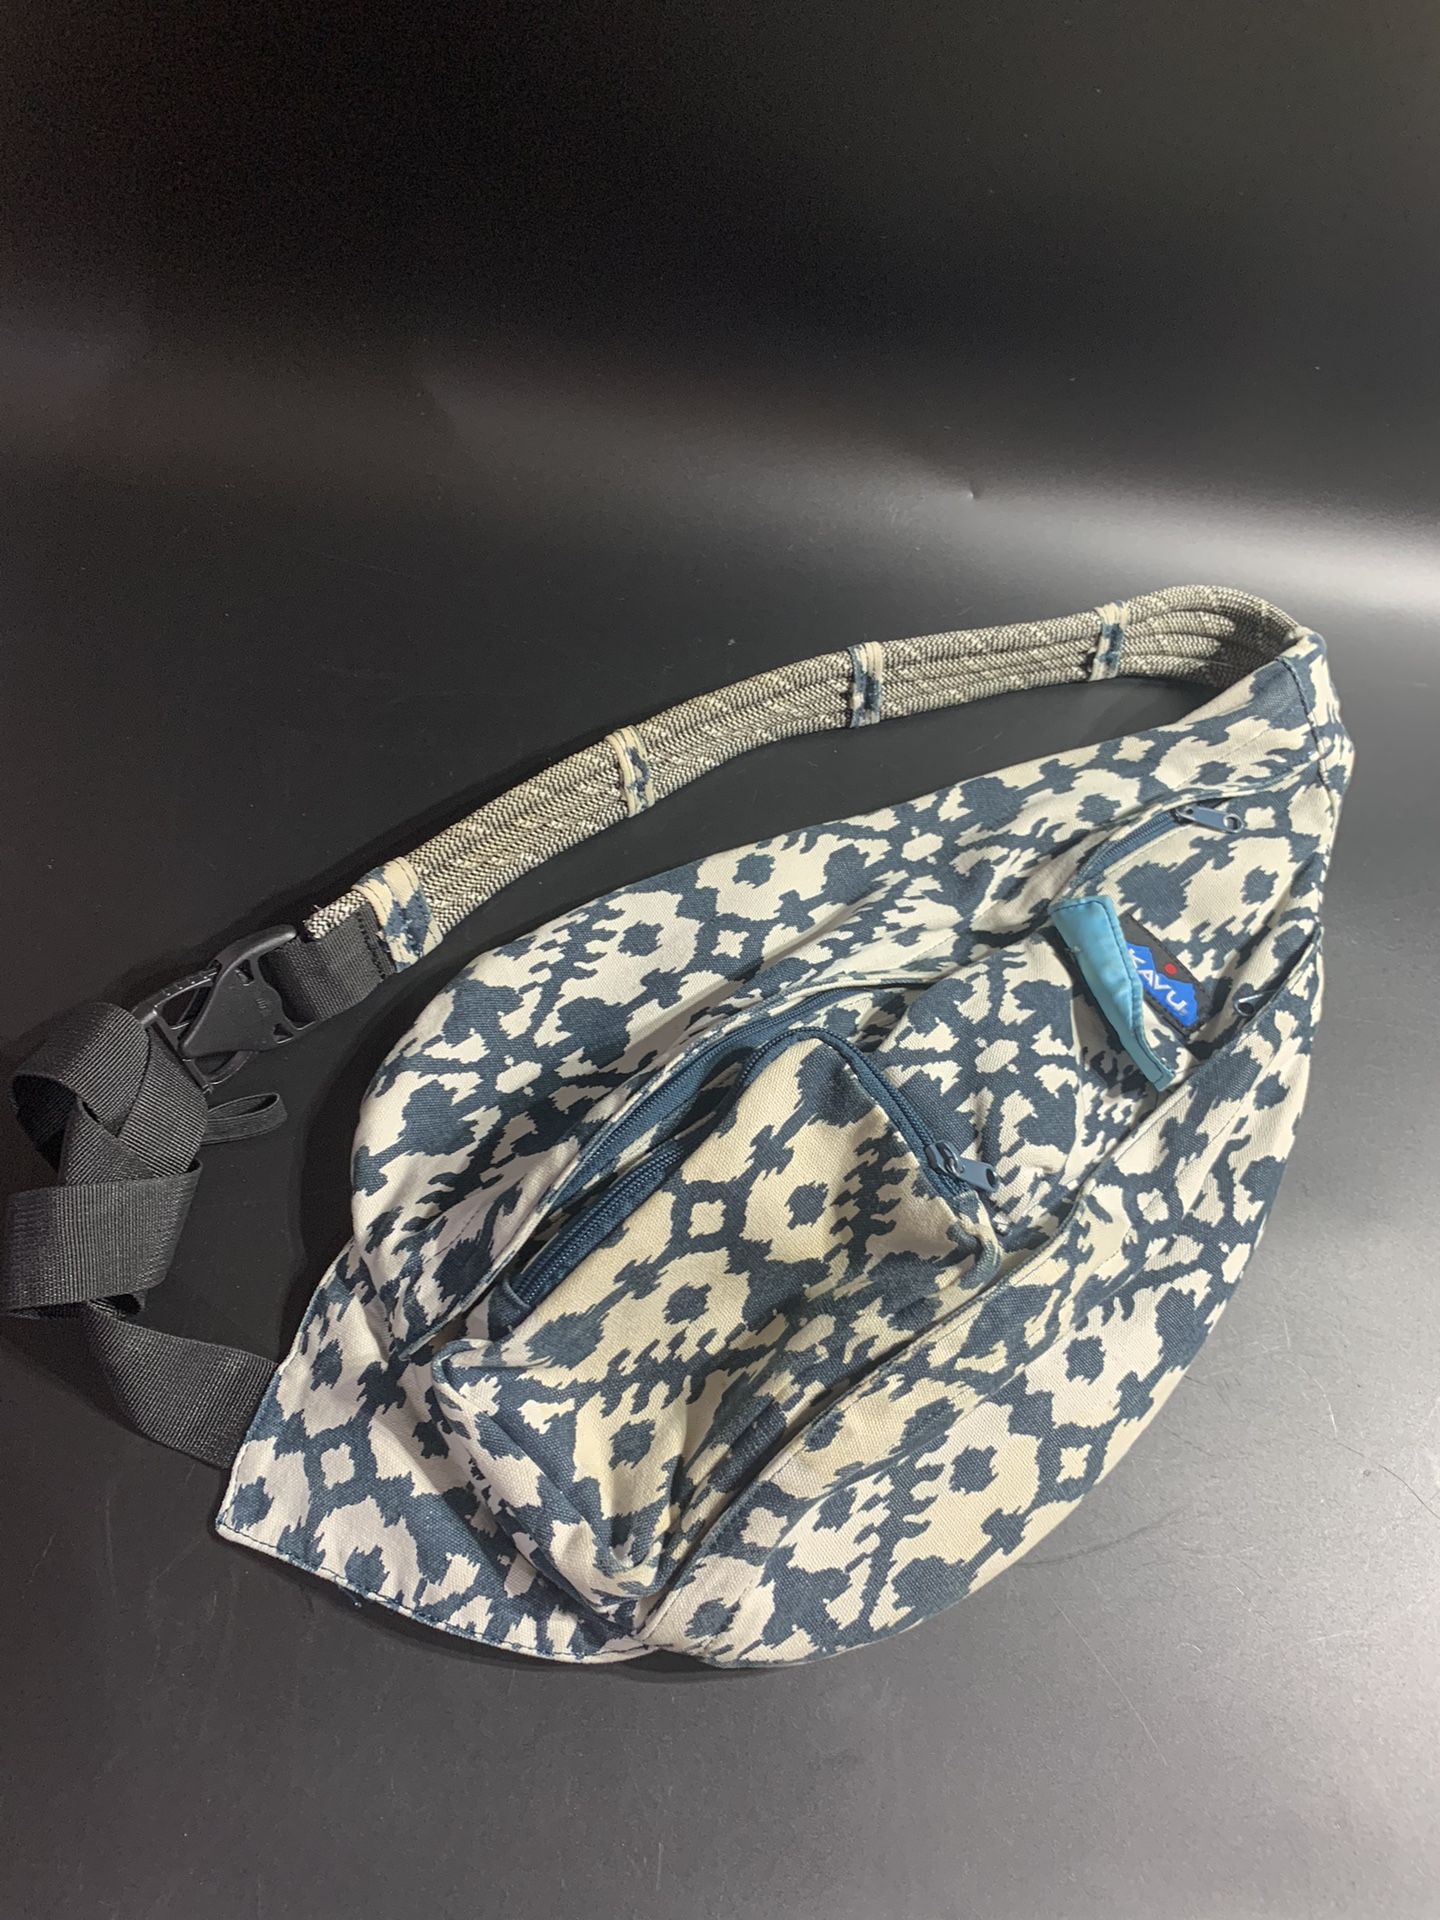 Kavu Rope Bag - Sling Style Backpack *Blue Blot* For Camping Hiking Commuting   **Pocket on front is slightly yellow as shown **  This KAVU Rope Sling